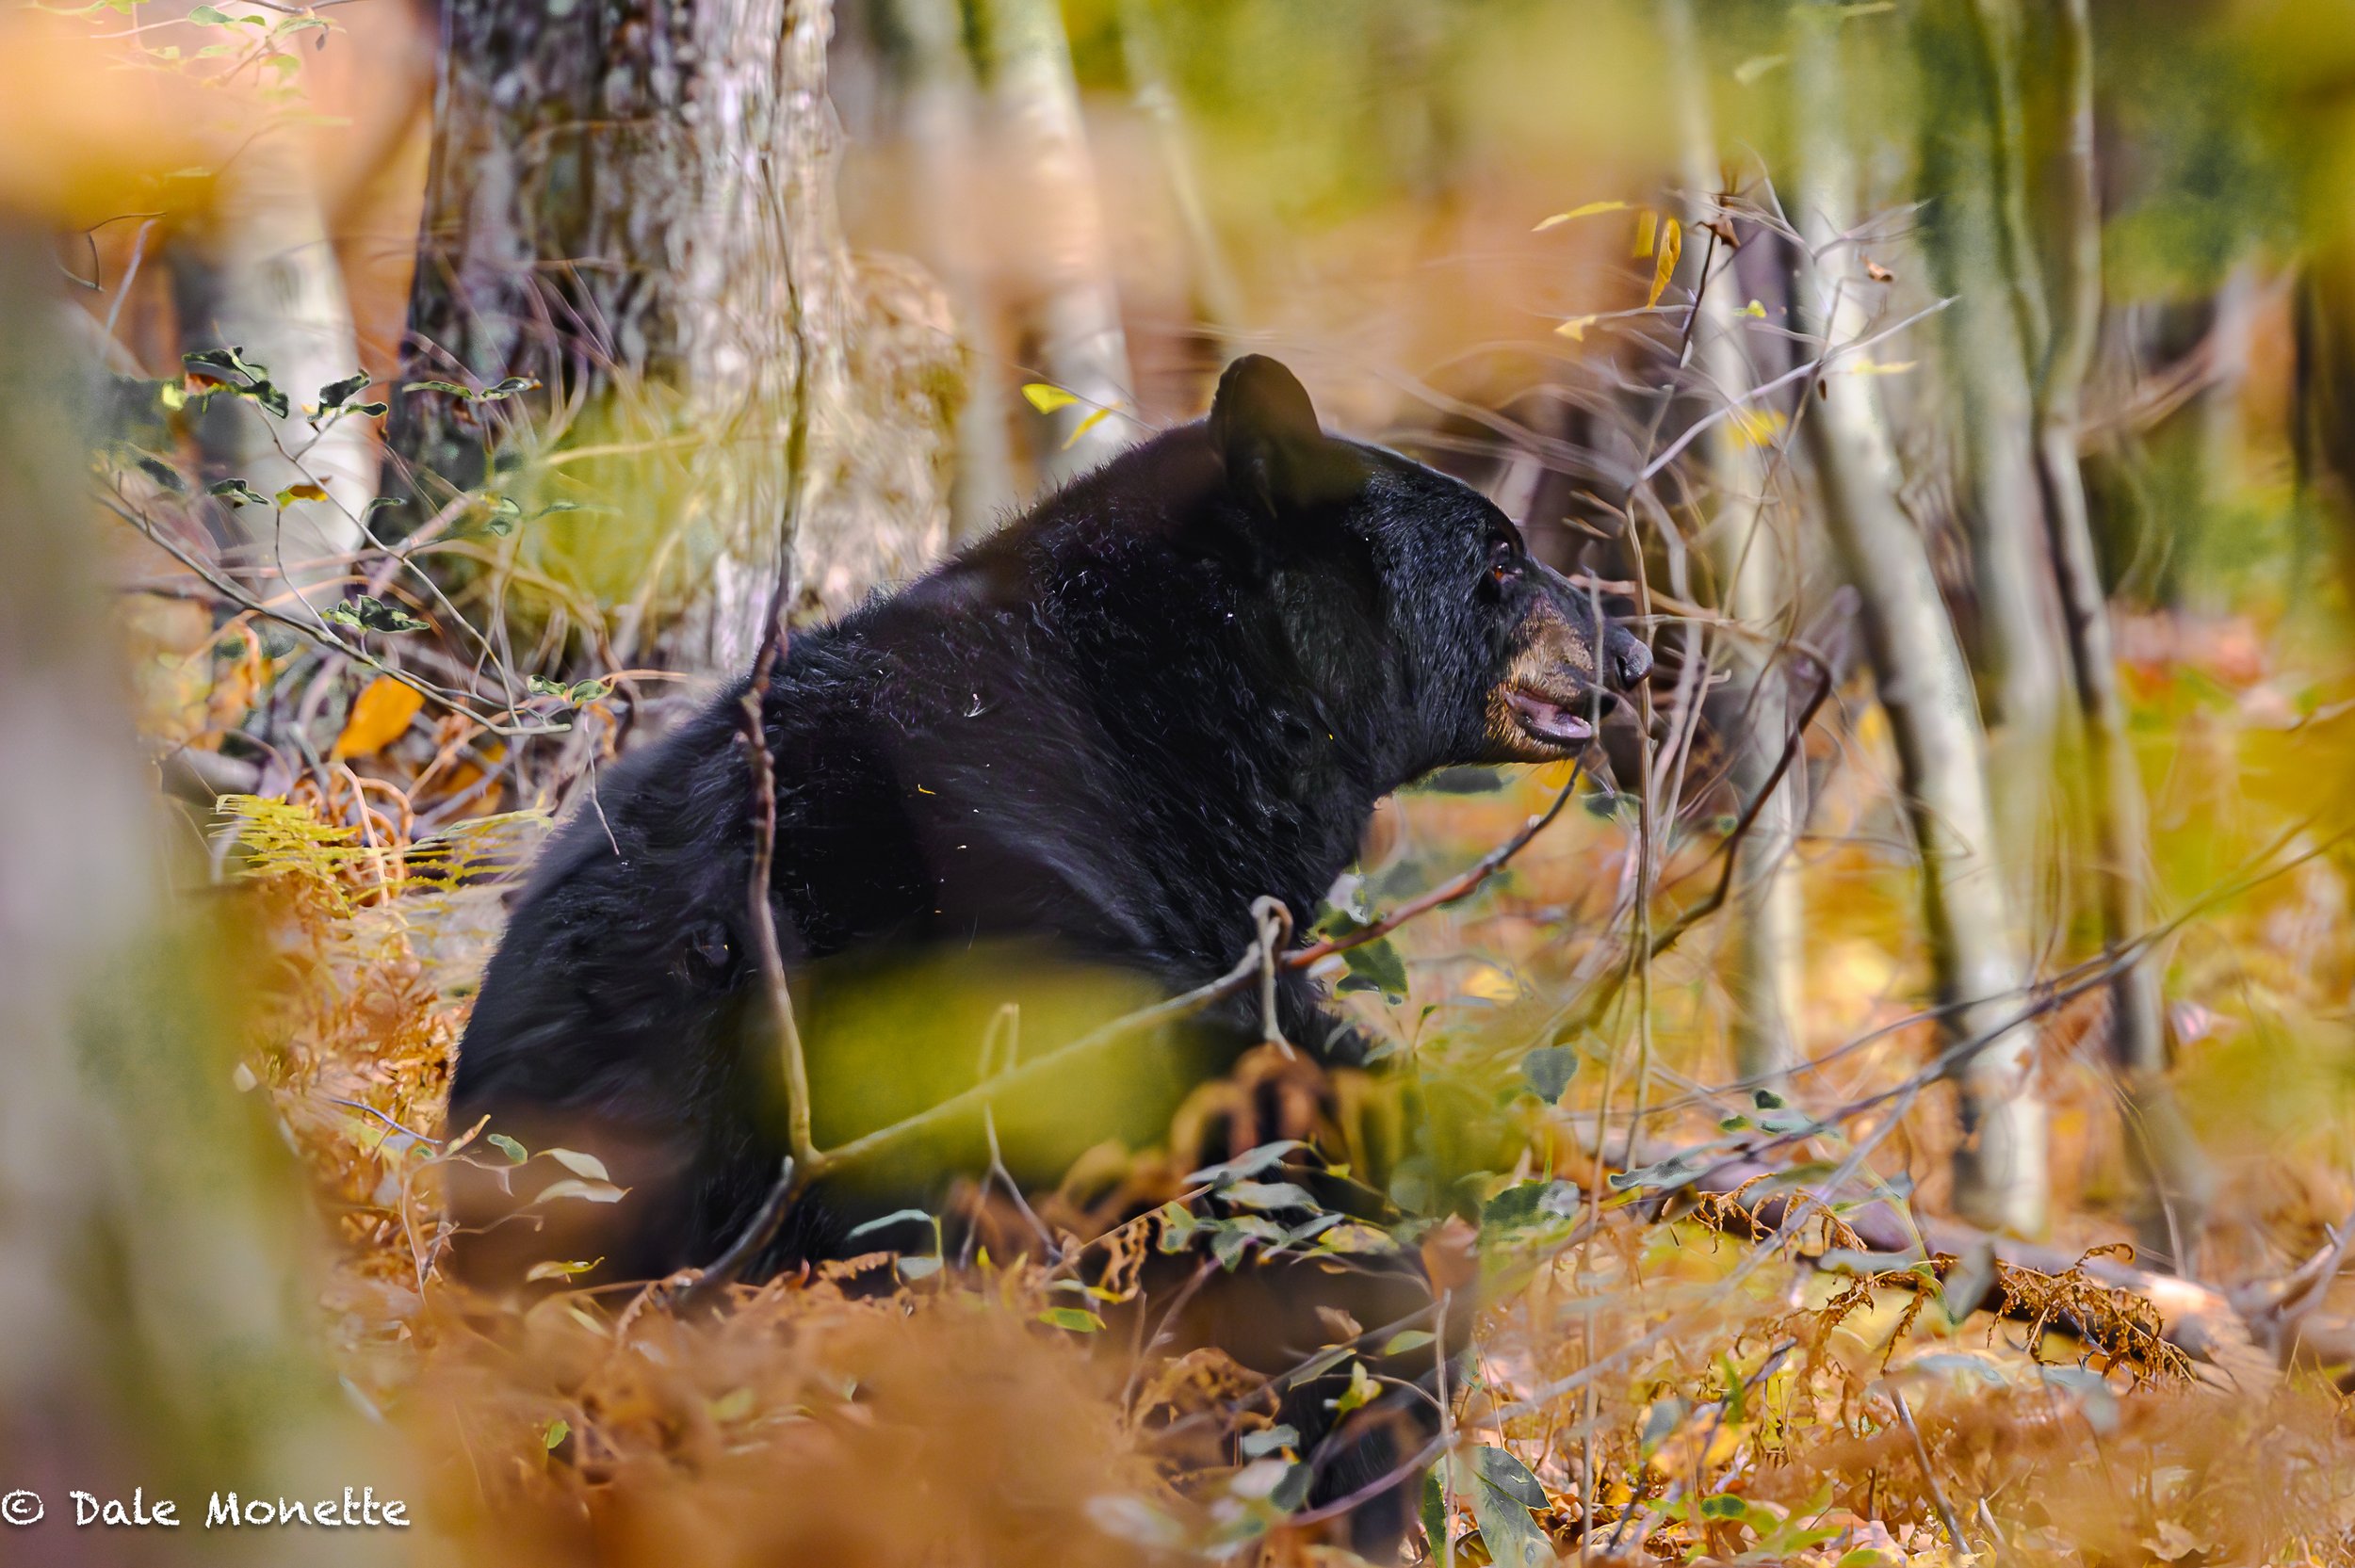   Bears are bulking up for the coming winter. This one was intent of scarfing up something on the ground that really kept his interest. He had no clue I was in the trail watching with my telephoto lens.  